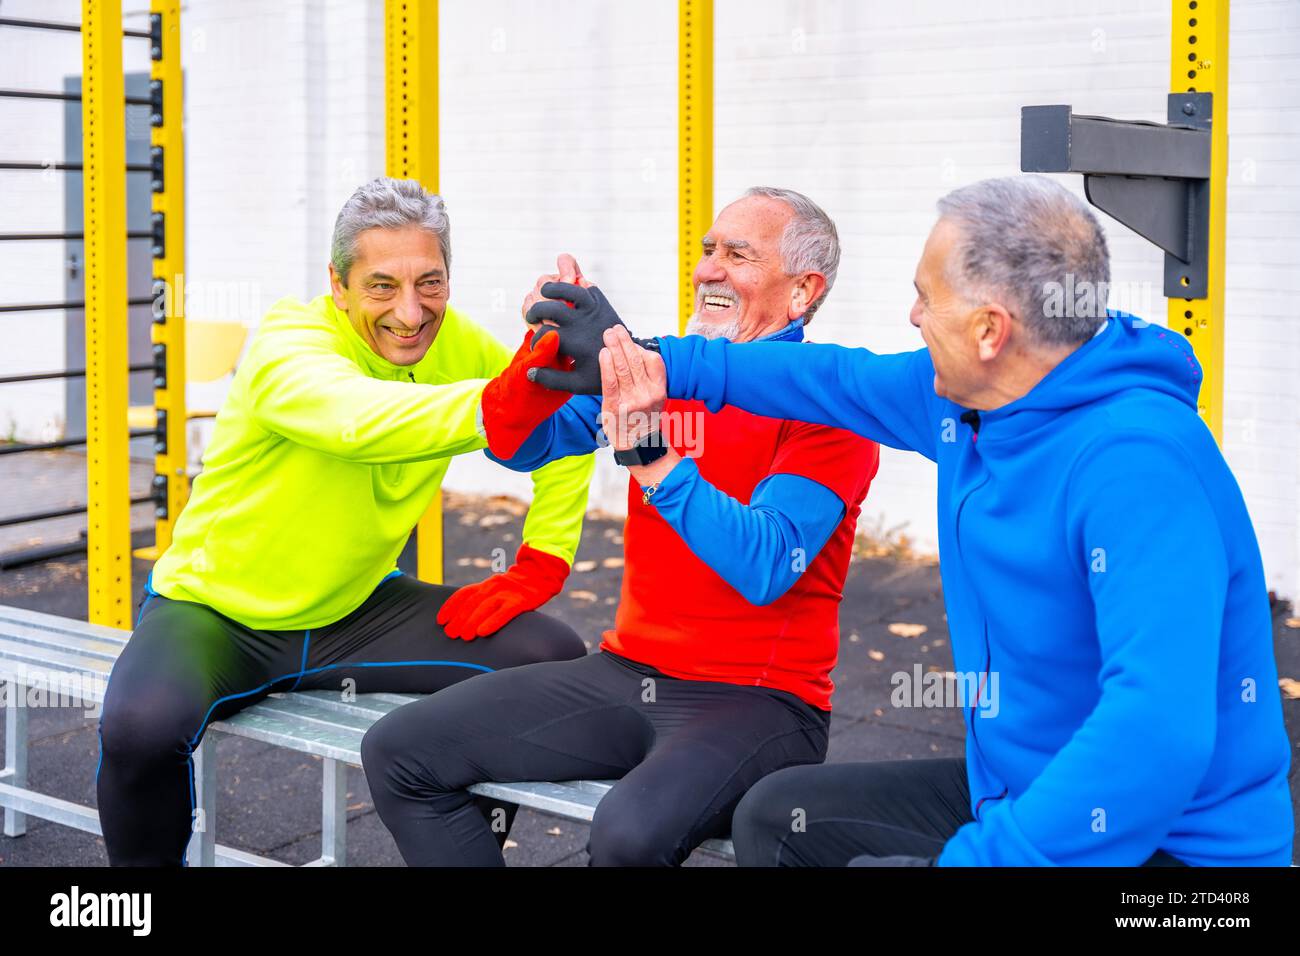 Three senior retired men giving high-five in an outdoor sports playground Stock Photo